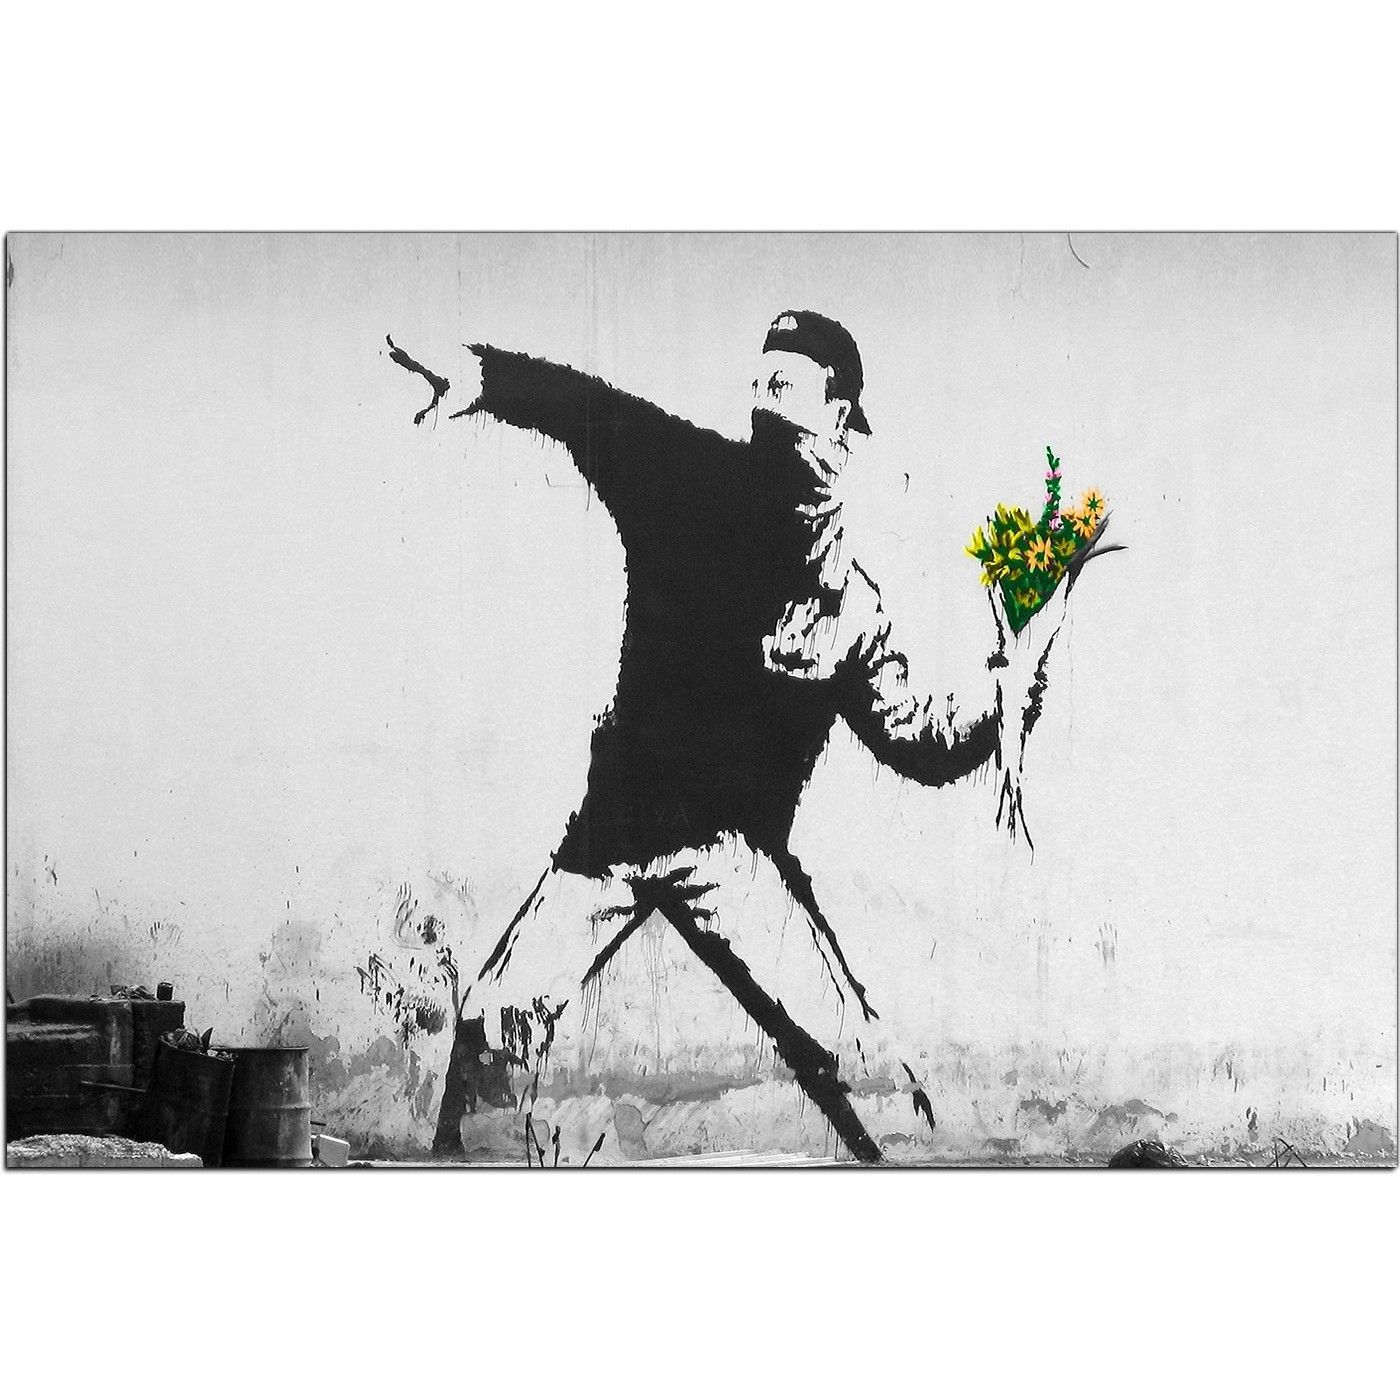 Banksy Canvas Wall Art Intended For Preferred Banksy Canvas Prints – Flower Thrower (View 1 of 15)